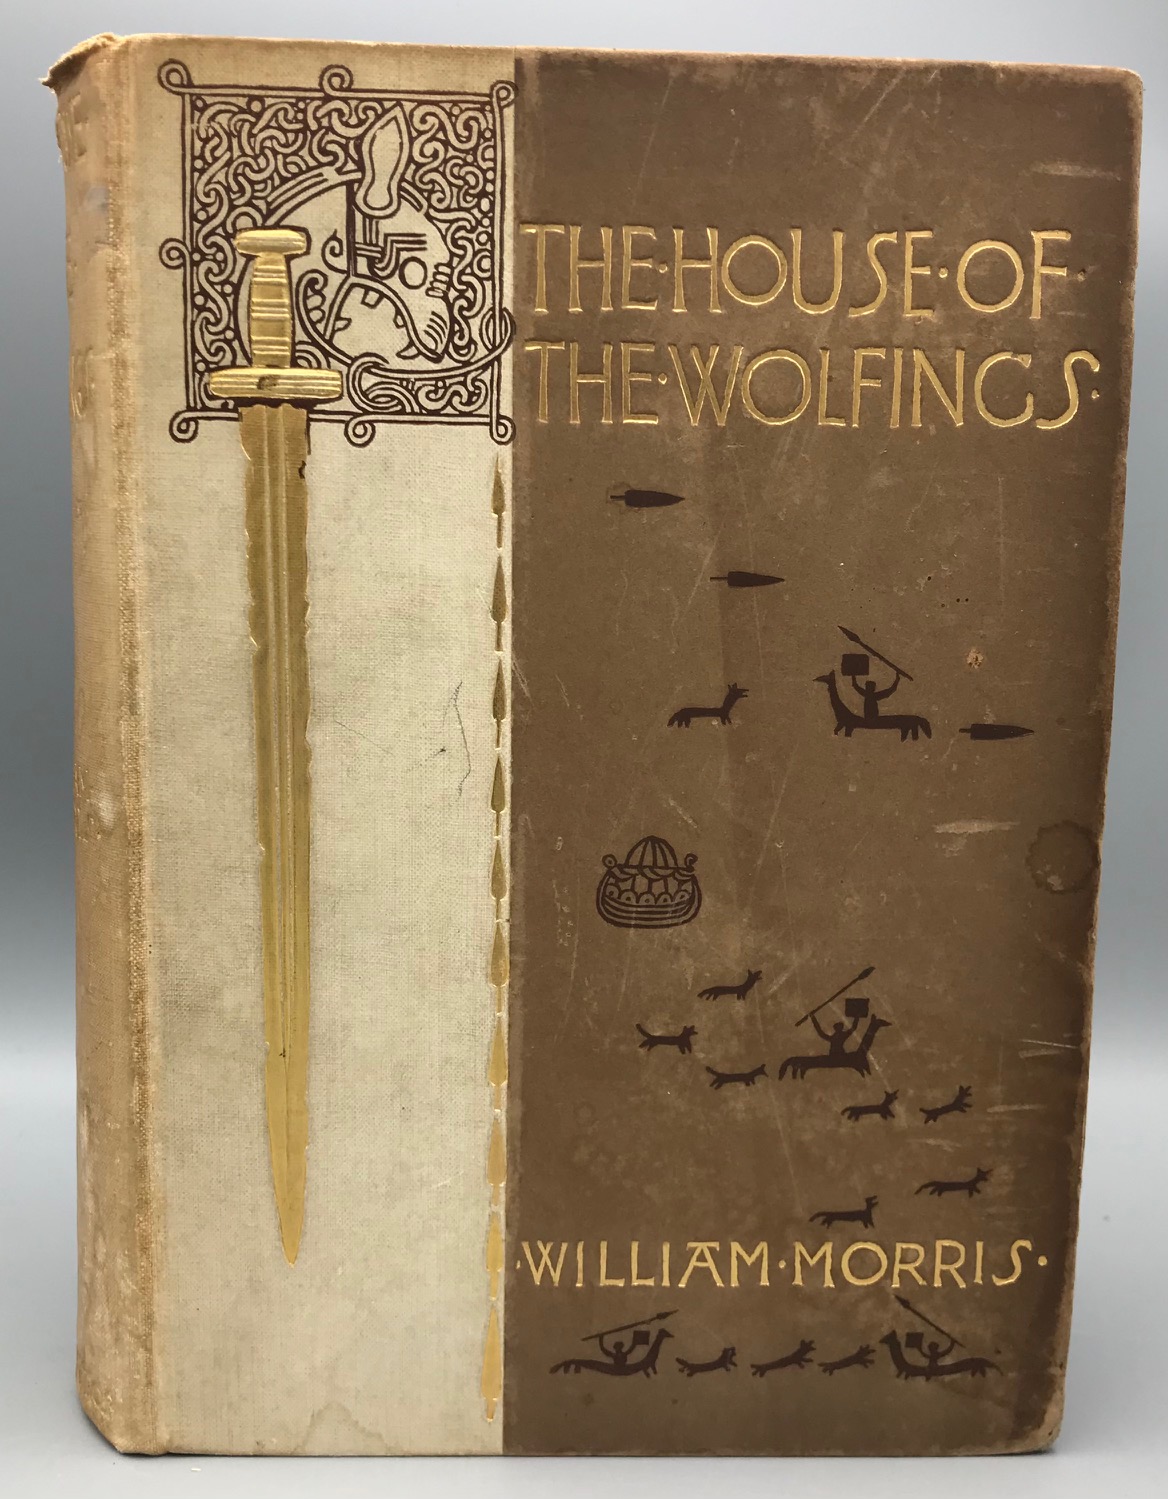 A TALE OF THE HOUSE OF THE WOLFINGS, by William Morris - 1890 [Ltd. Ed.]